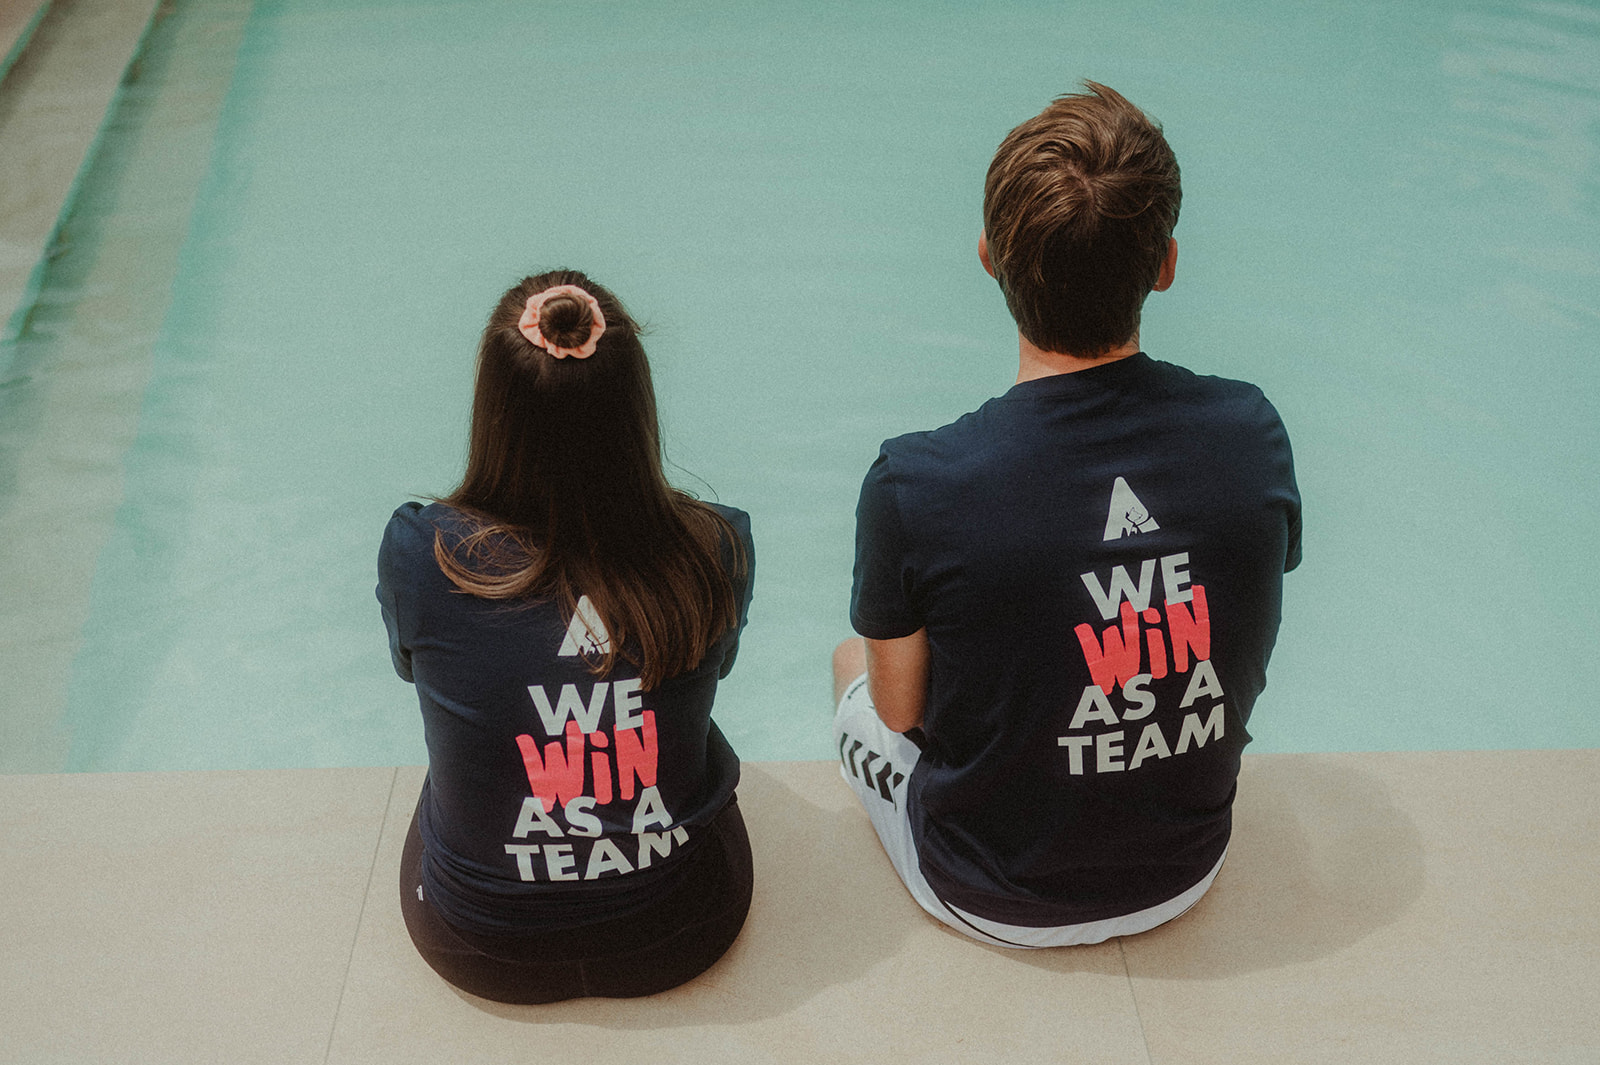 2 seated people from behind with "We win as a team" on the T-shirt © Alissa Lüpke - www.alissa.luepke.us